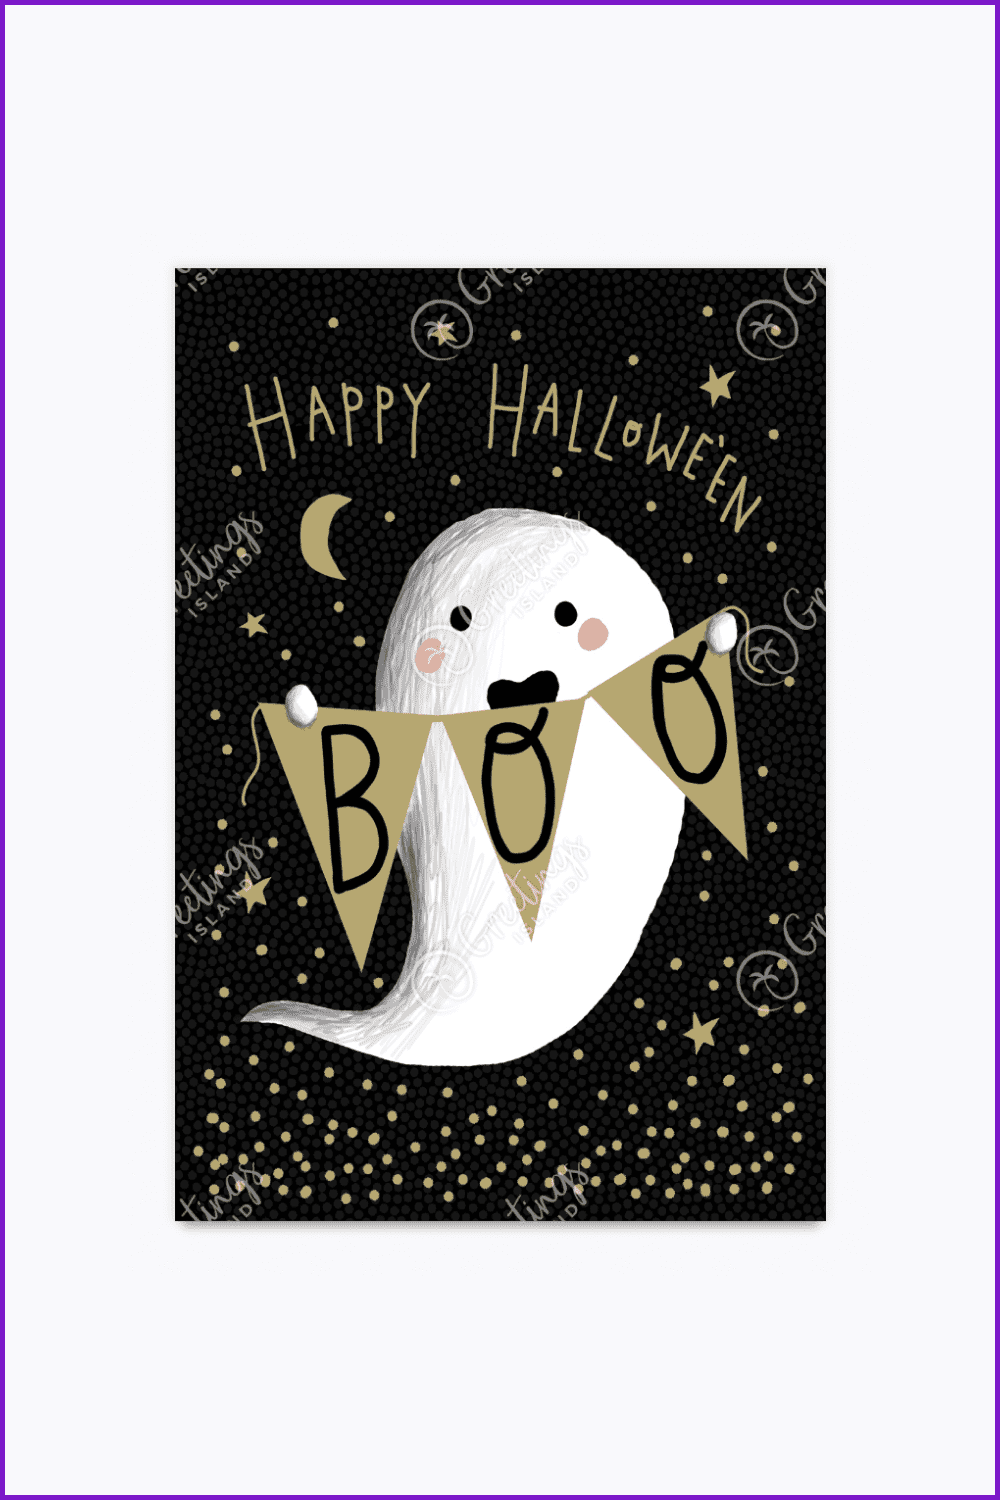 Drawn, cute white ghost on the background of the starry sky.